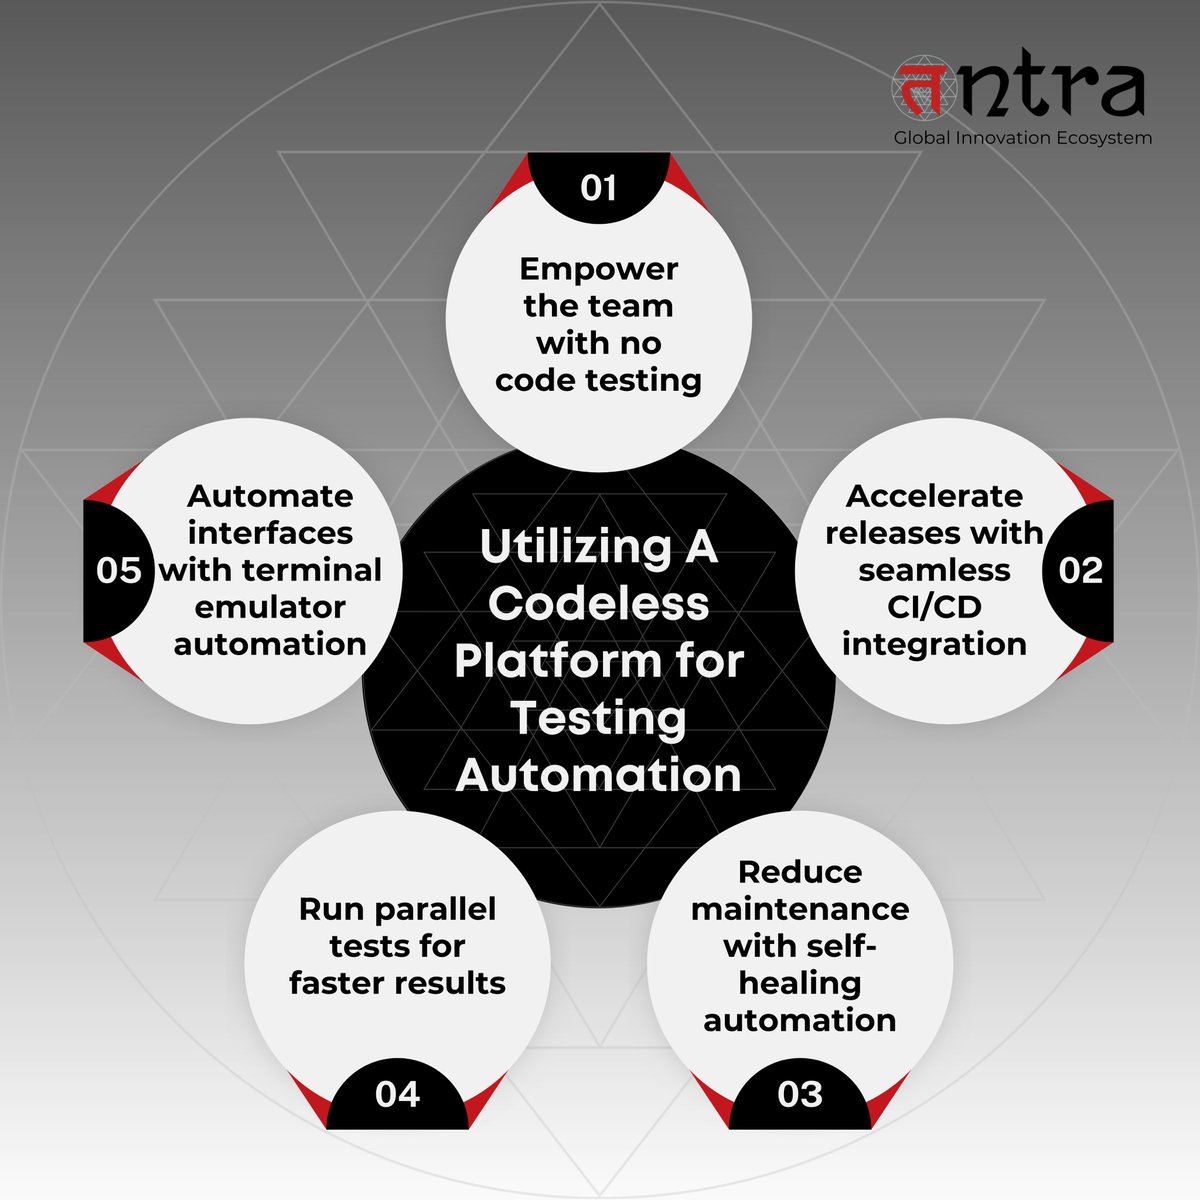 Tntra's #QA Guild used AccelQ's code-less platform to eliminate technical barriers & accelerate testing.

#ACCELQ #AITools #TechTalk #TechTraining #Upskill #SoftwareTesting #SoftwareQuality #TestAutomation  #QAchallenges  #QATrends #Testing #Automation #AutomationTesting